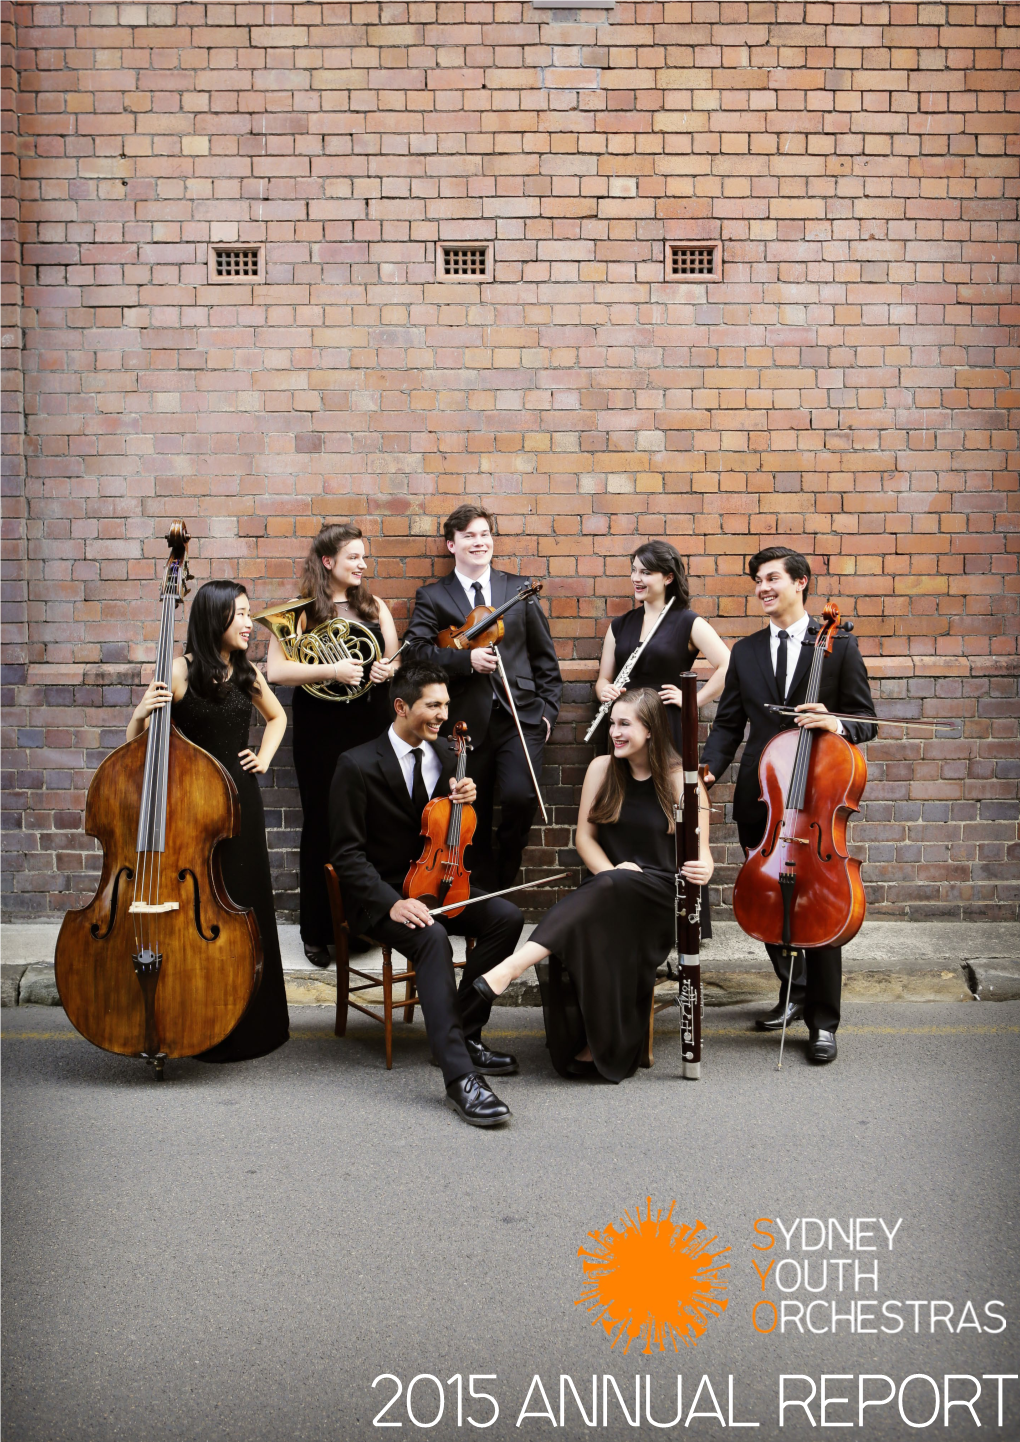 2015 Annual Report Sydney Youth Orchestras